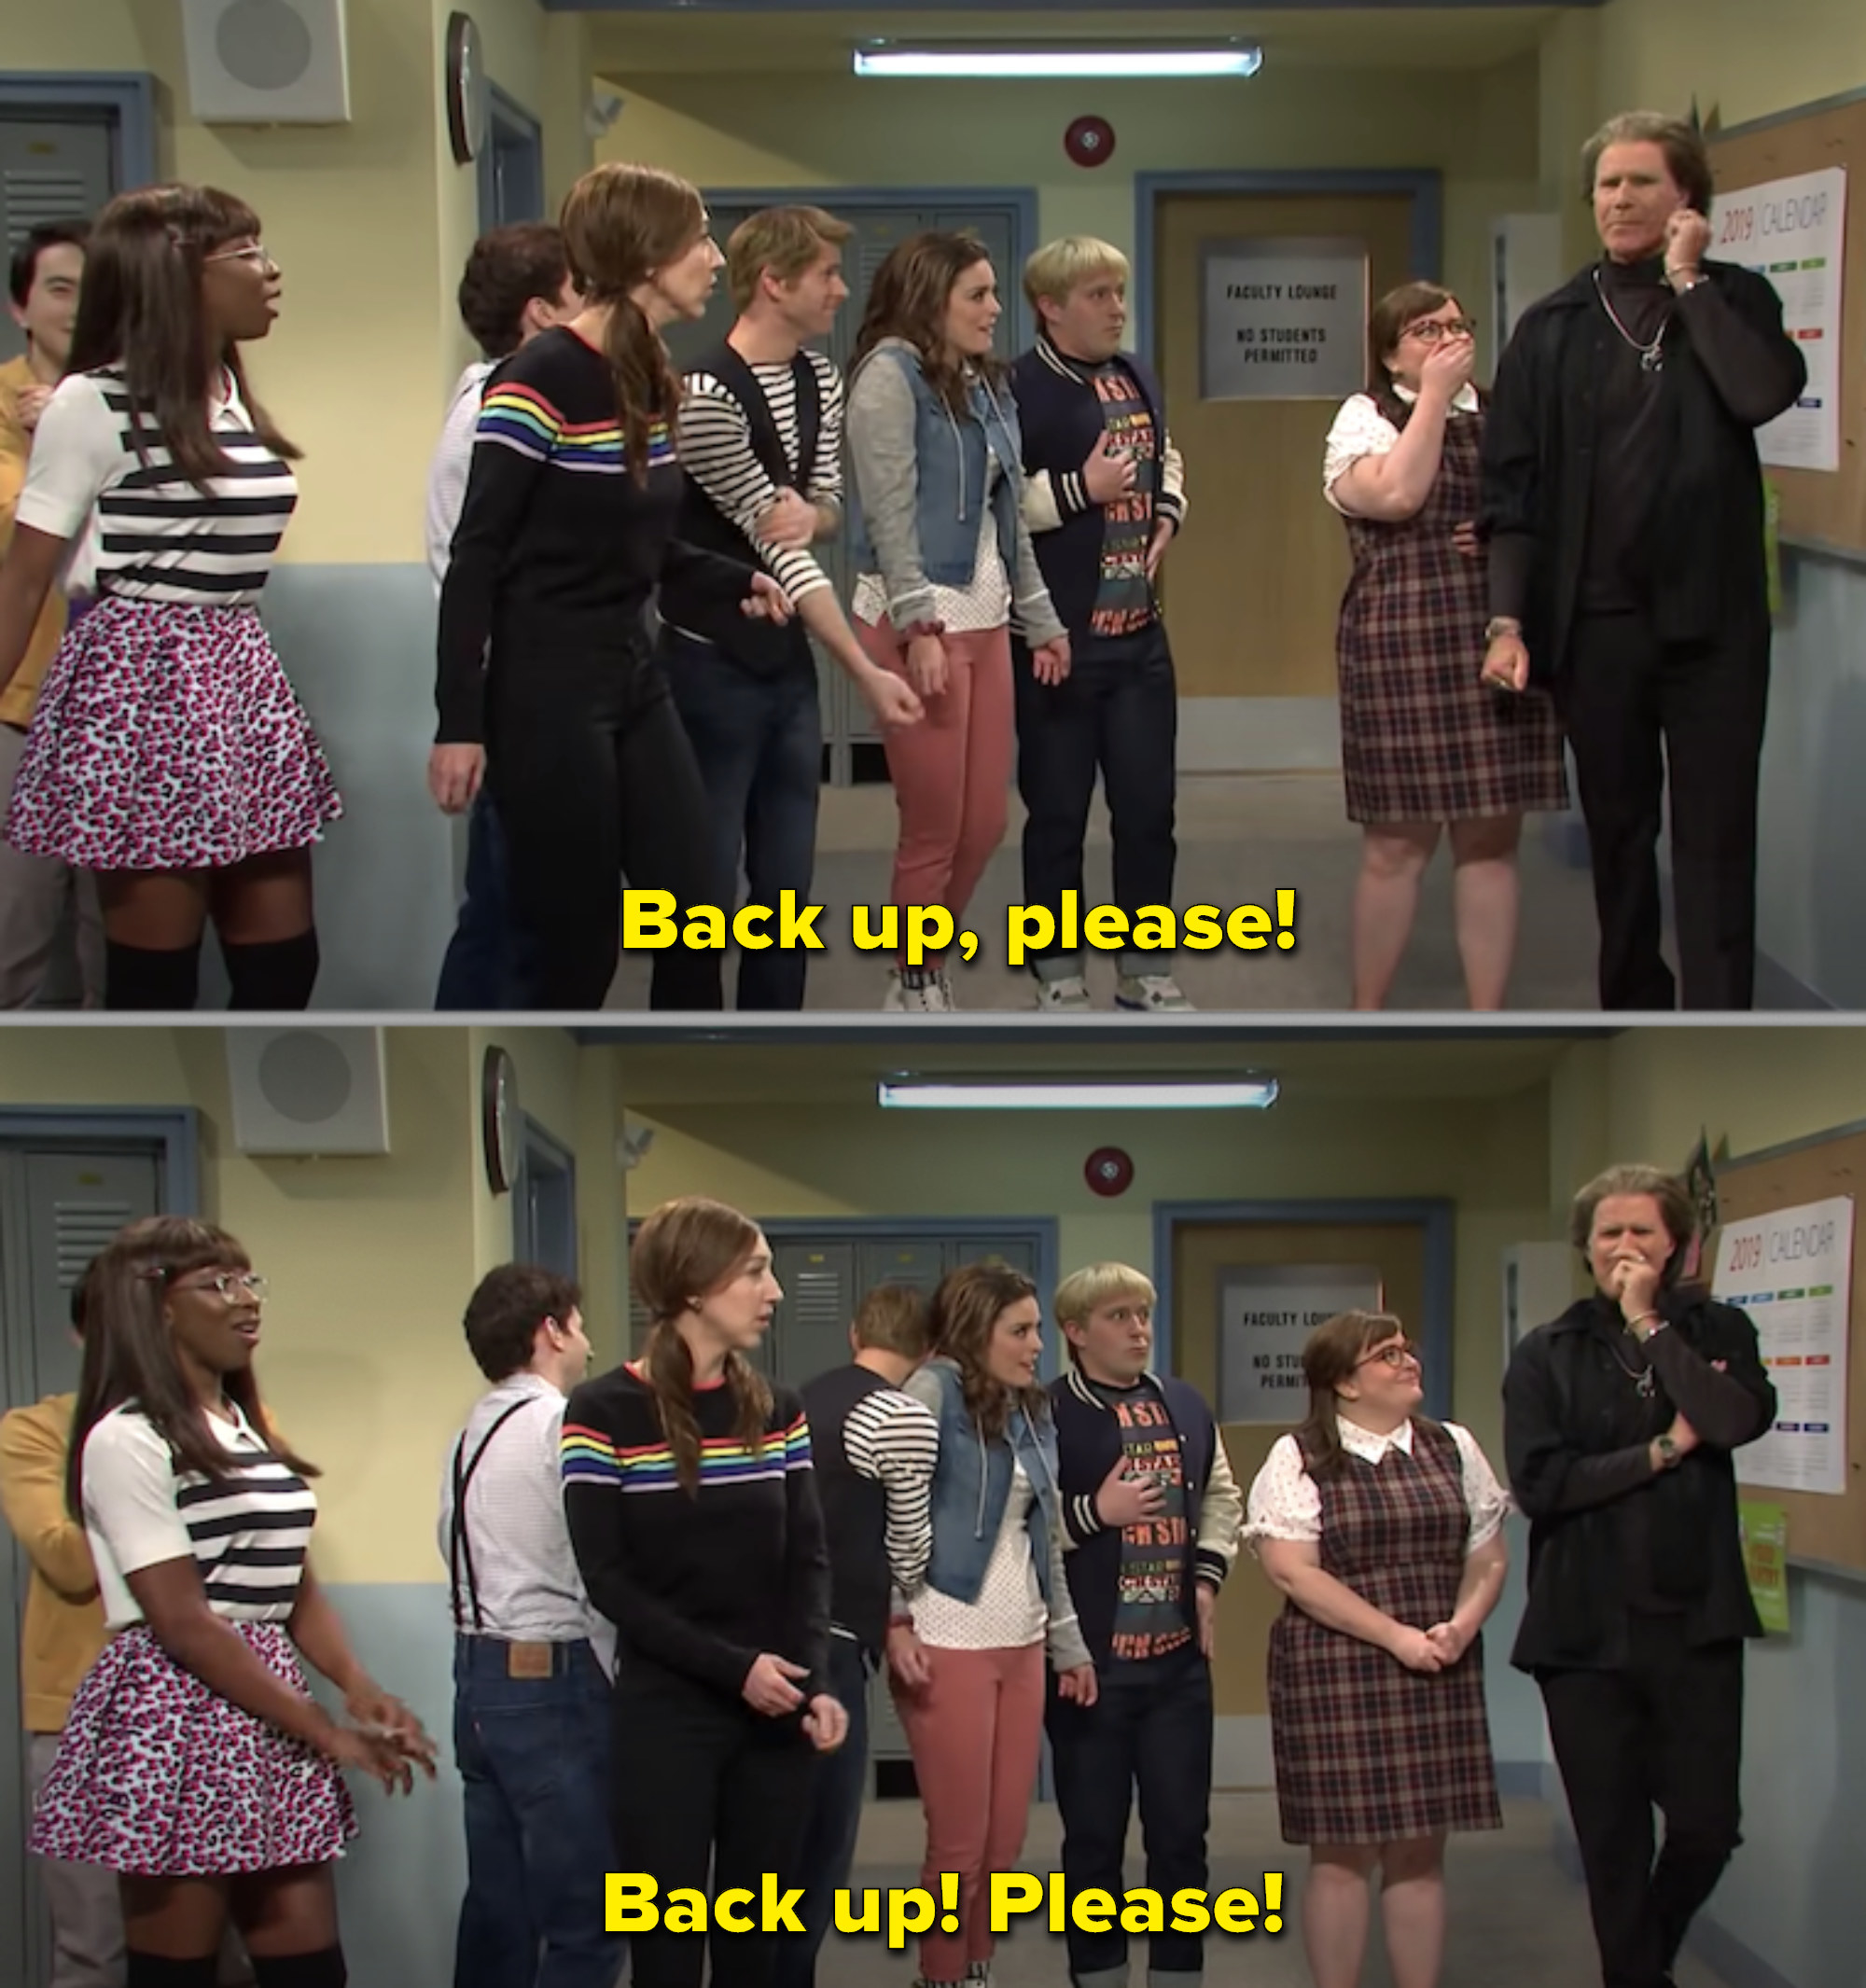 Group of people on a TV show set, a character gesturing for others to back up. Text: &quot;Back up, please!&quot; repeated